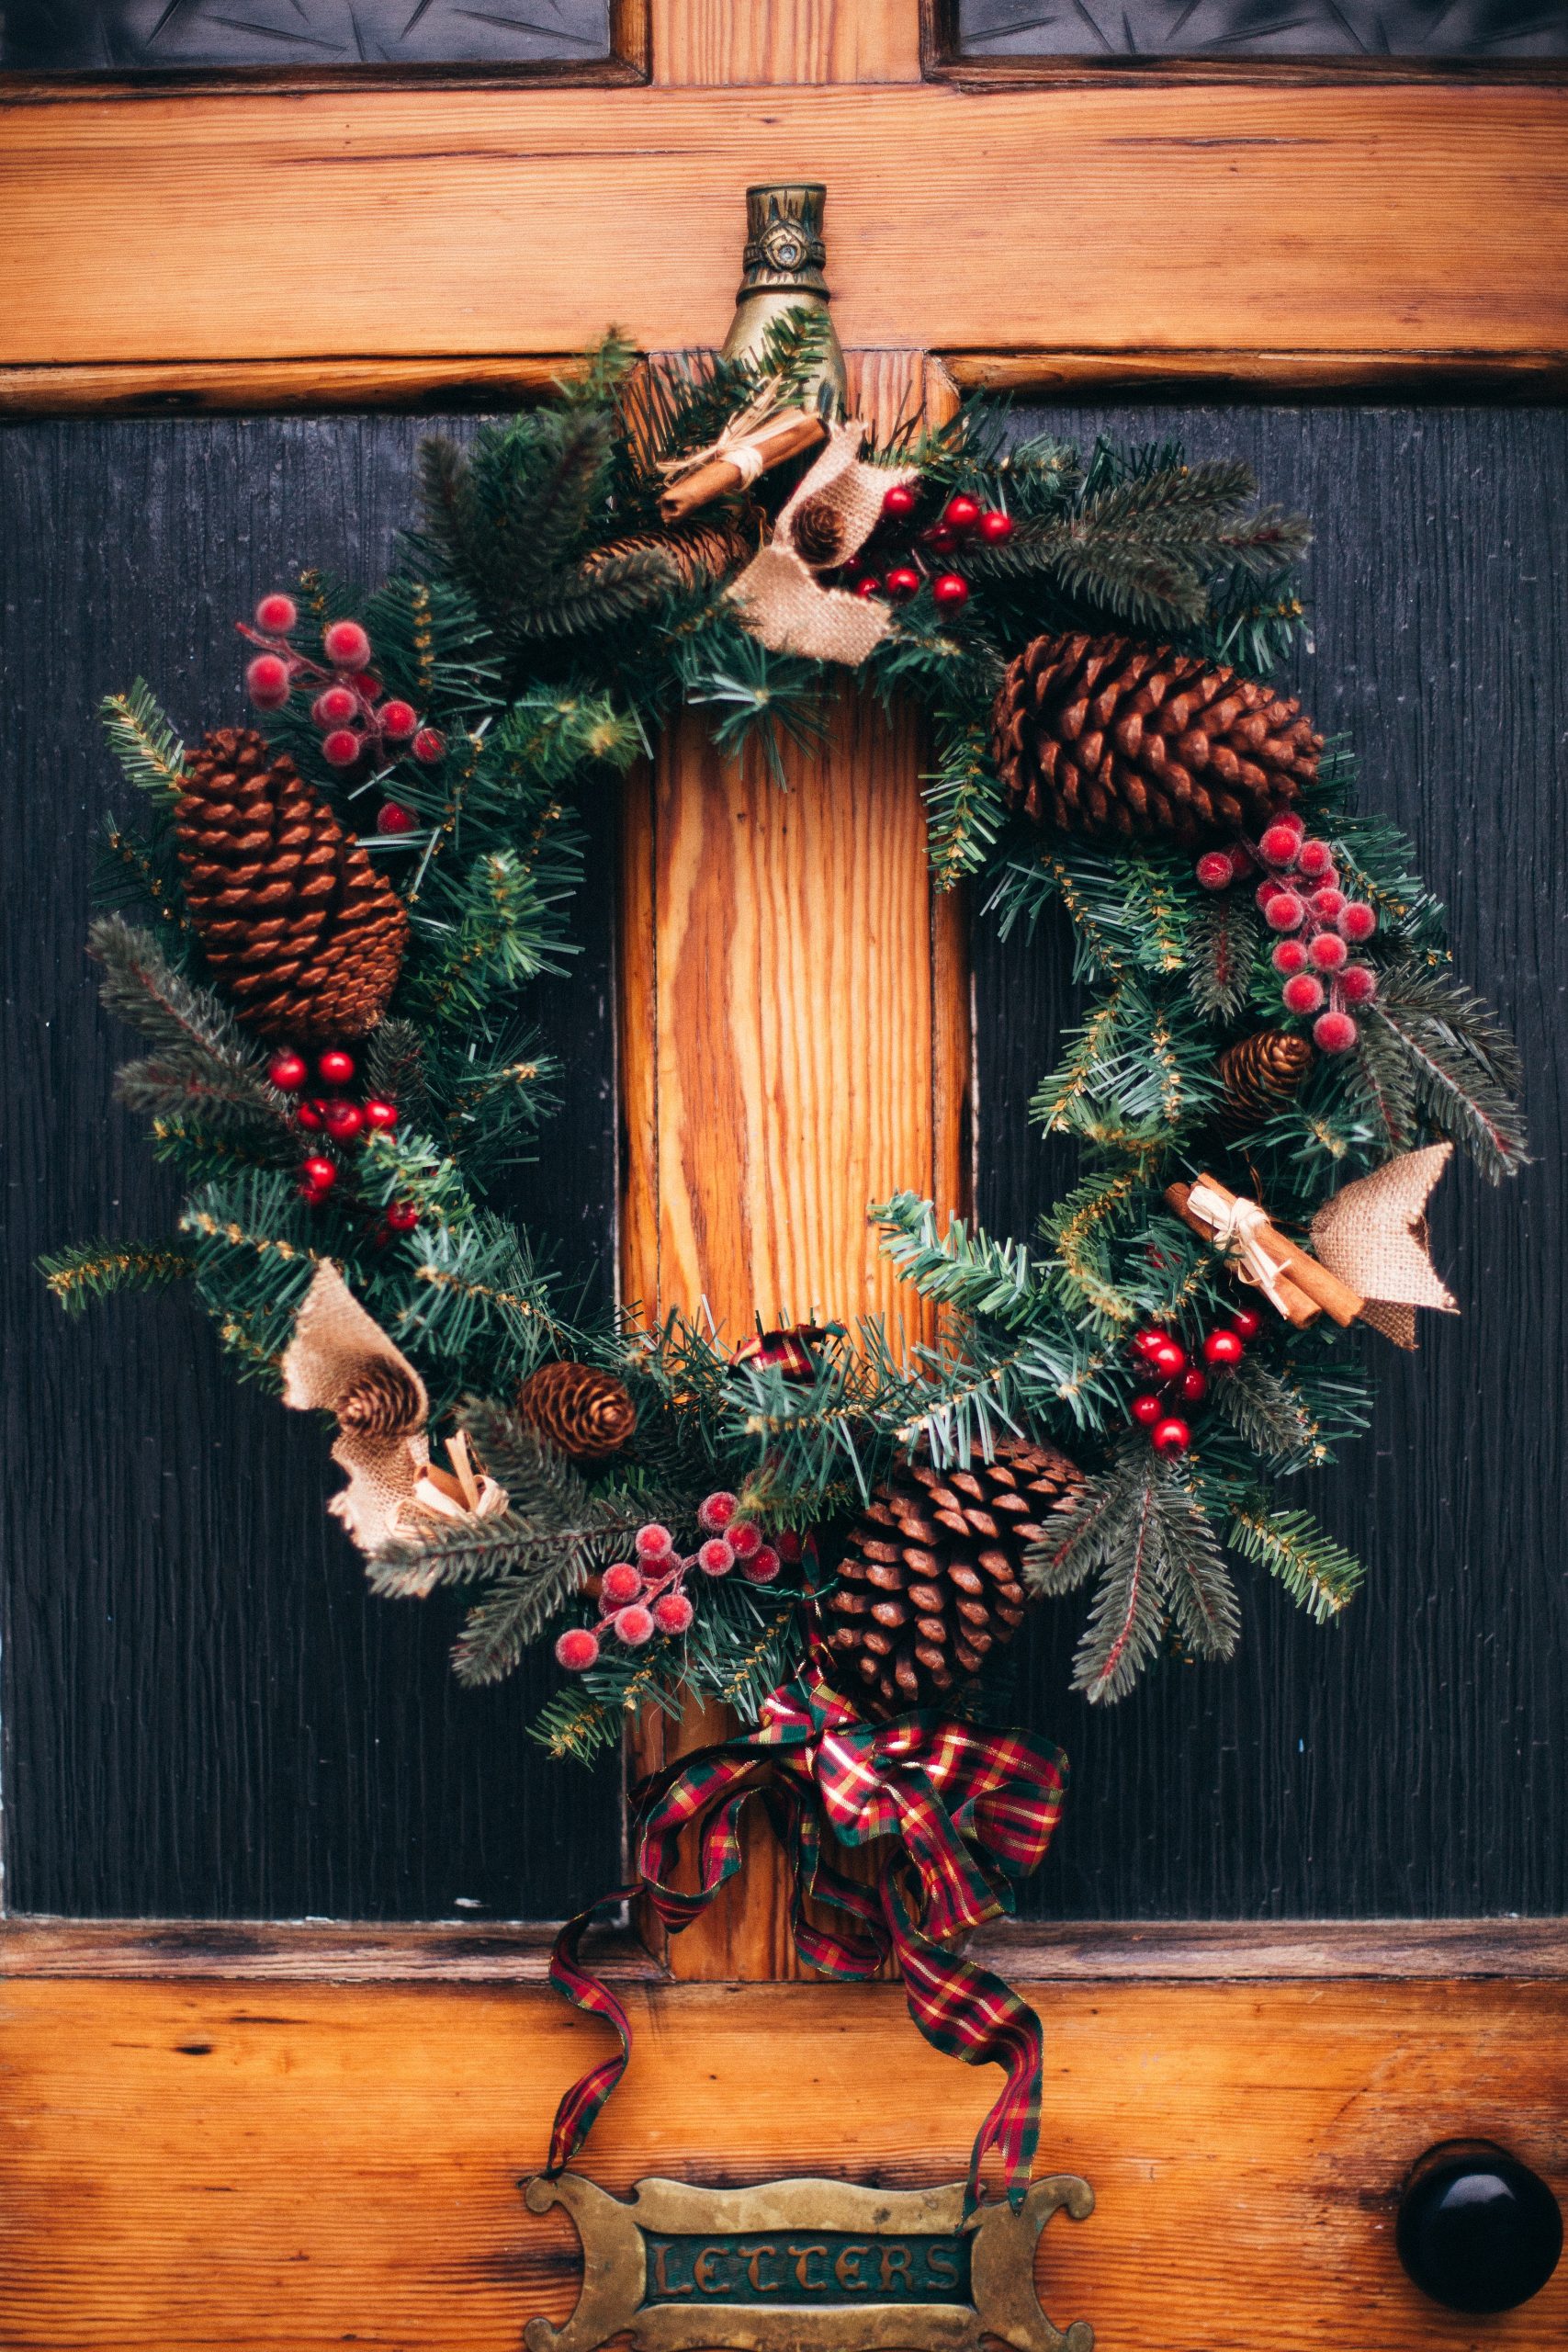 How To Make The Most Of A Covid Christmas This Year - Christmas Wreath